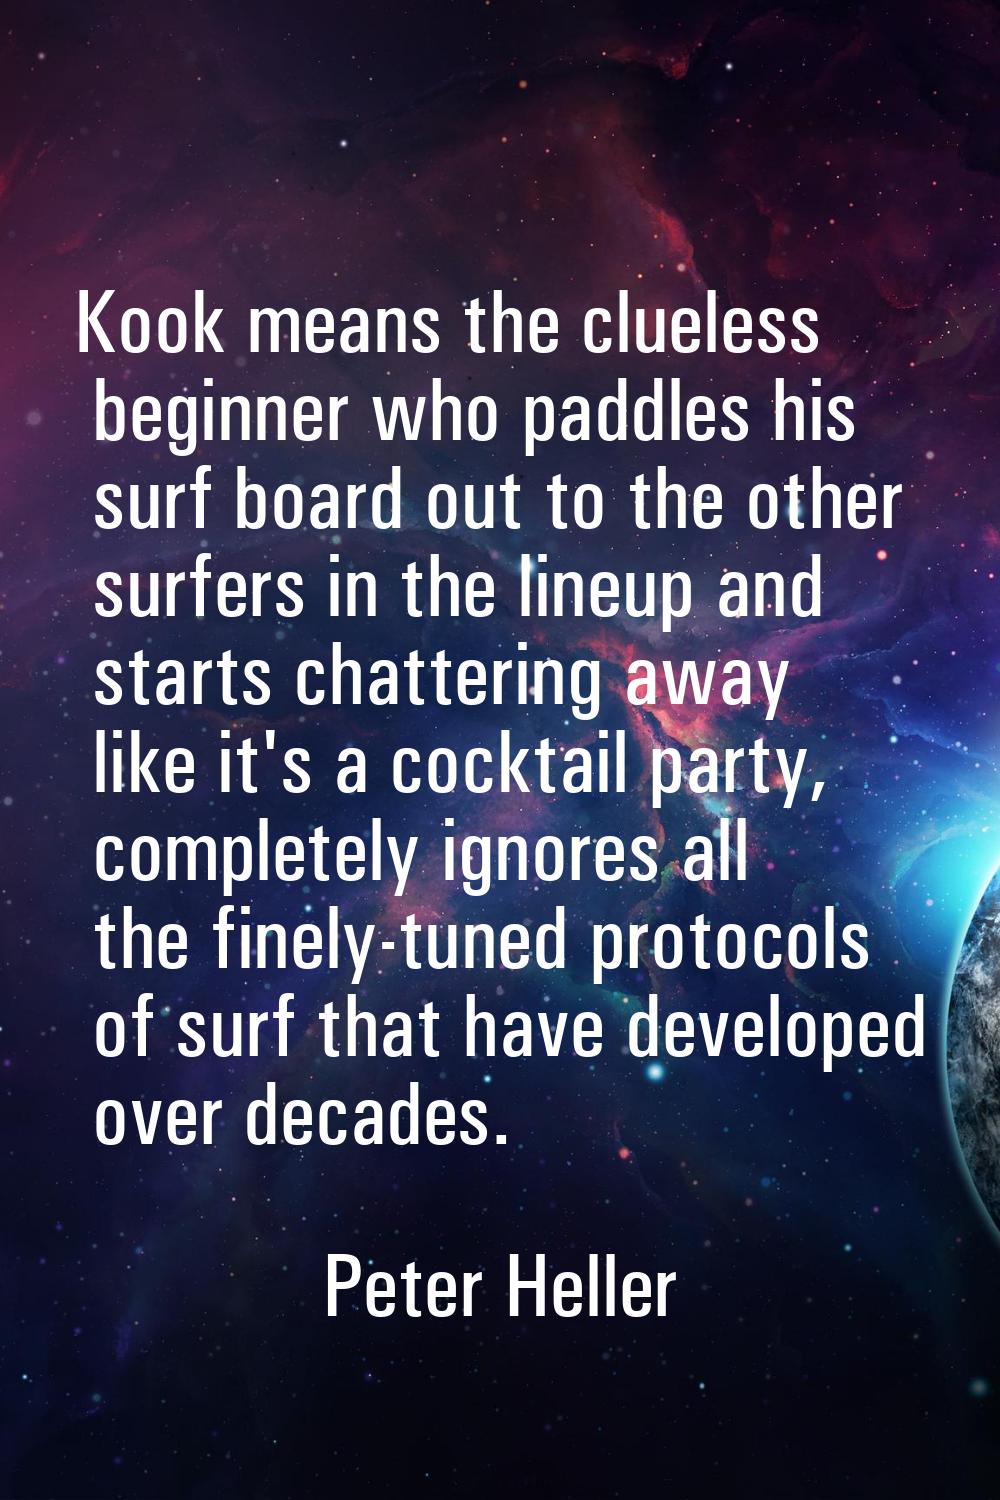 Kook means the clueless beginner who paddles his surf board out to the other surfers in the lineup 